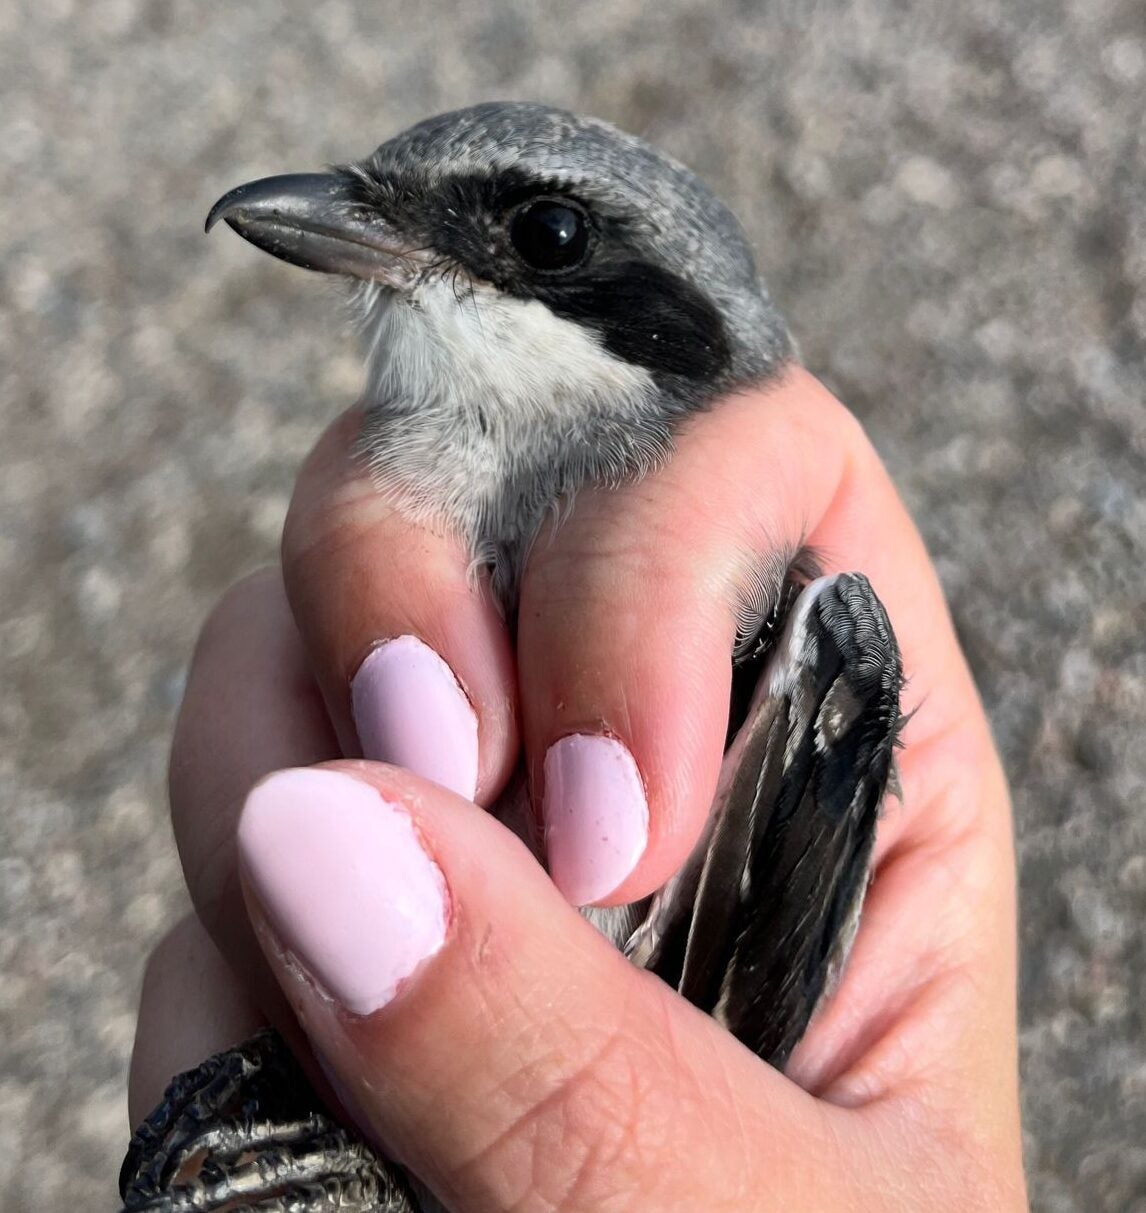 a closeup of a Loggerhead Shrike's face. The bird is being held safely in banders grip by a biologist's hand. Her fingernails are painted with pastel pink nail polish.